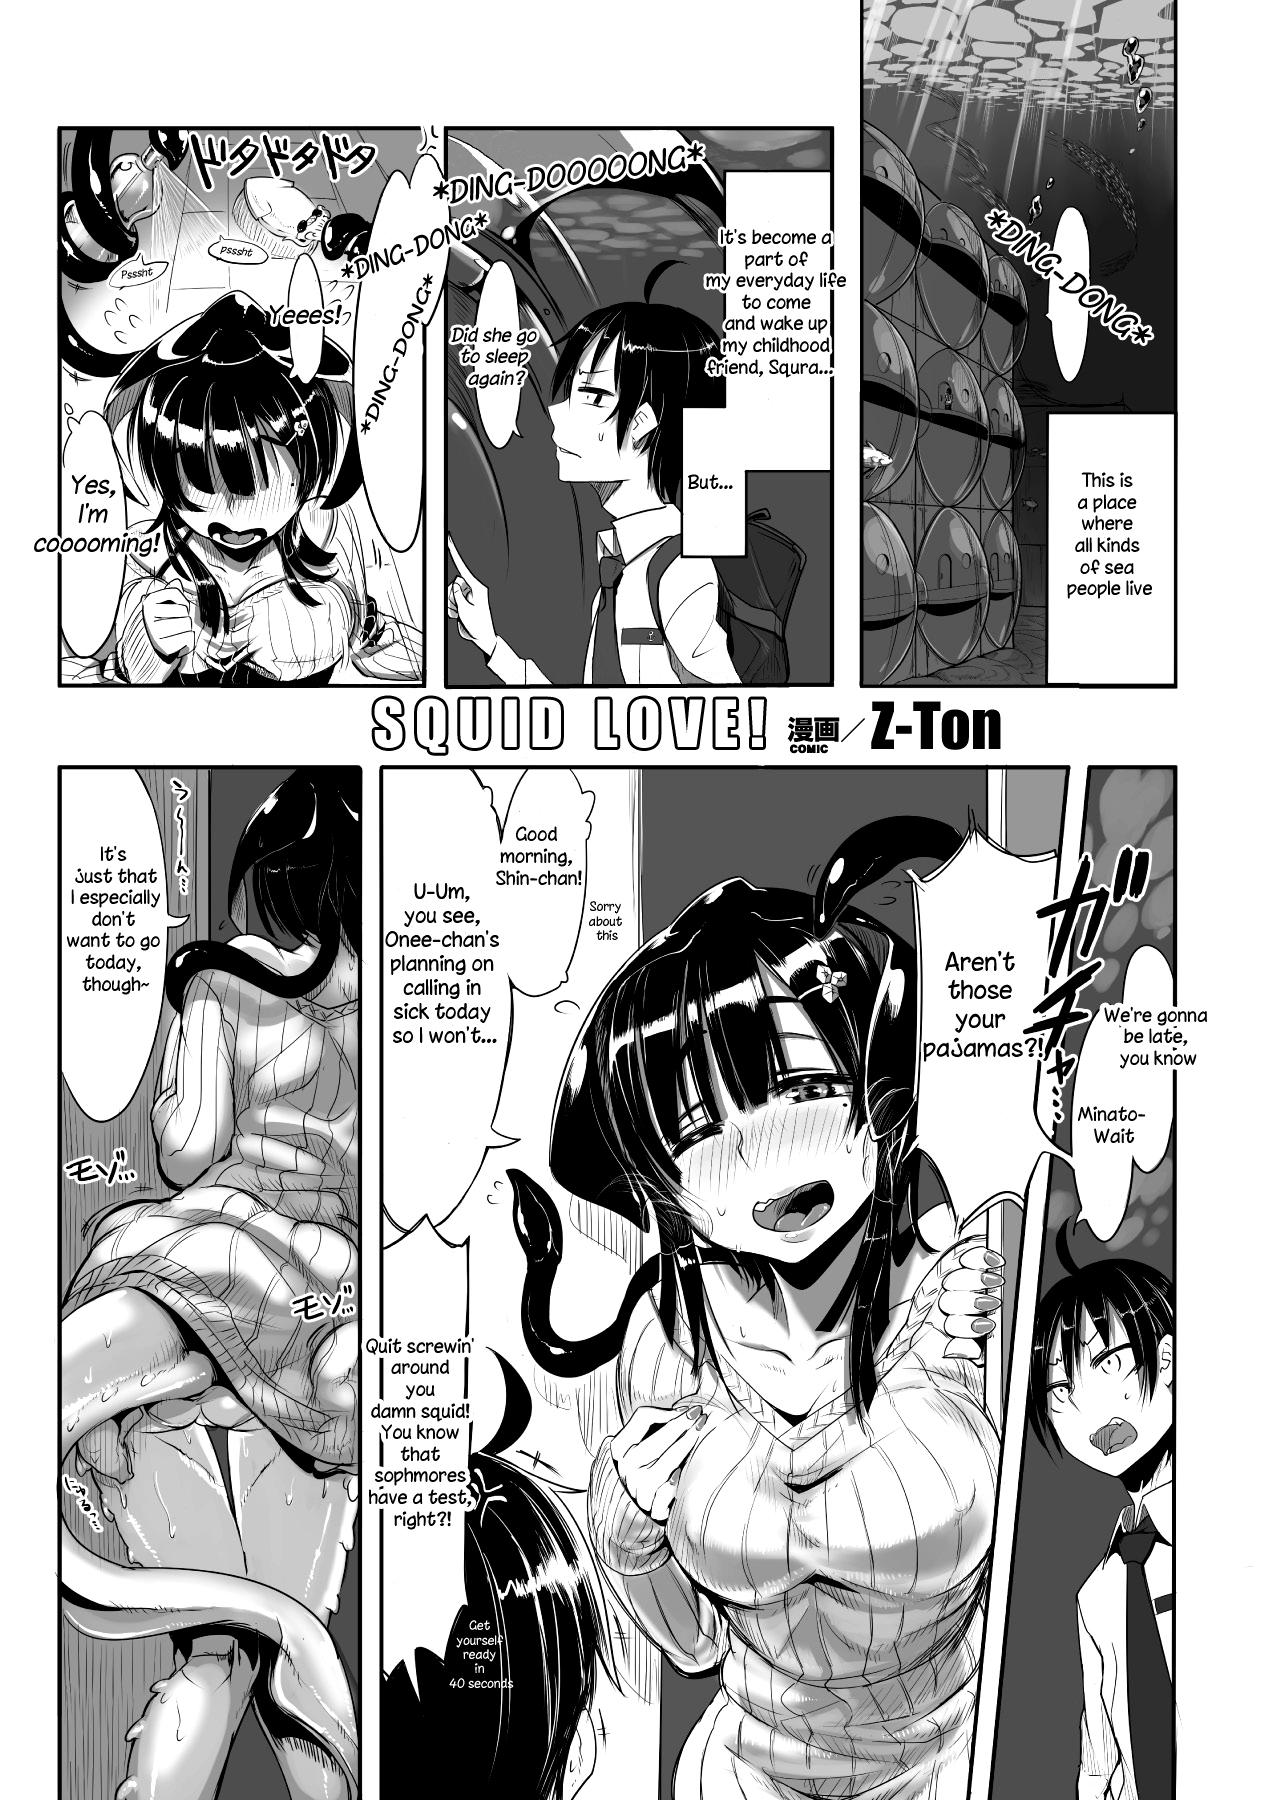 4some Bessatsu Comic Unreal Monster Musume Paradise Vol. 4 Livecams - Page 4